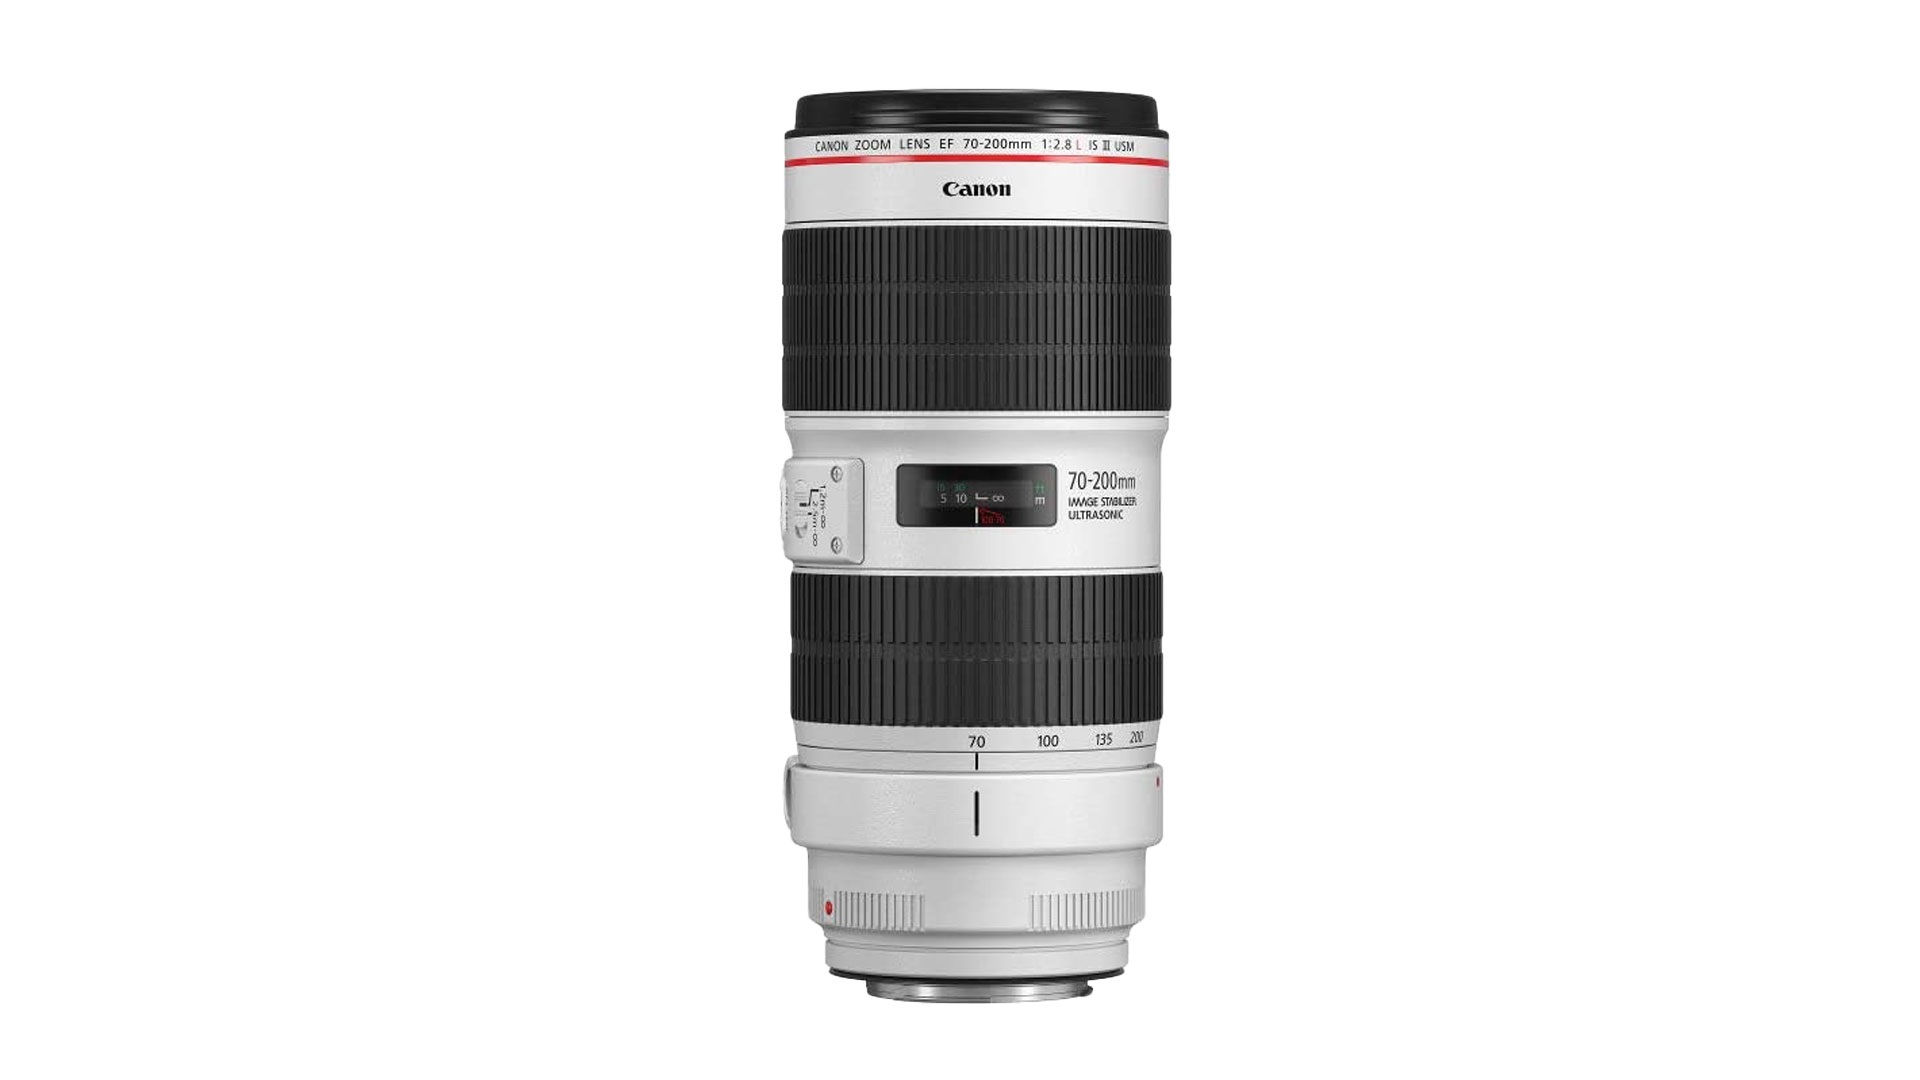 Best lenses for the Canon 6D Mark II: Canon EF 70-200mm f/2.8L IS III USM